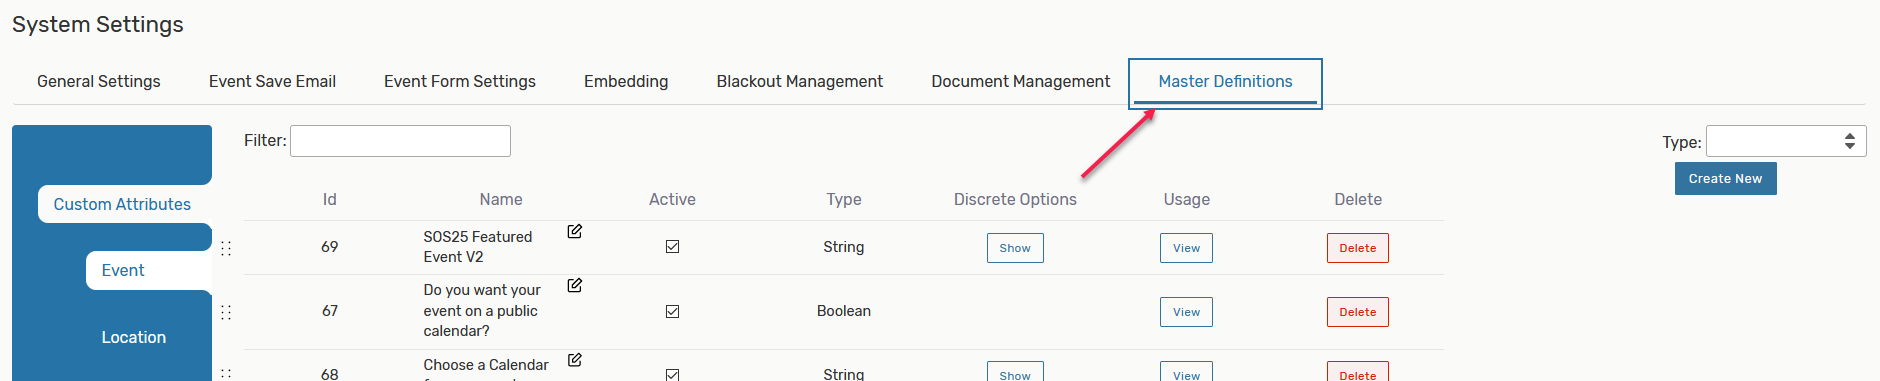 master definitions tab in system settings